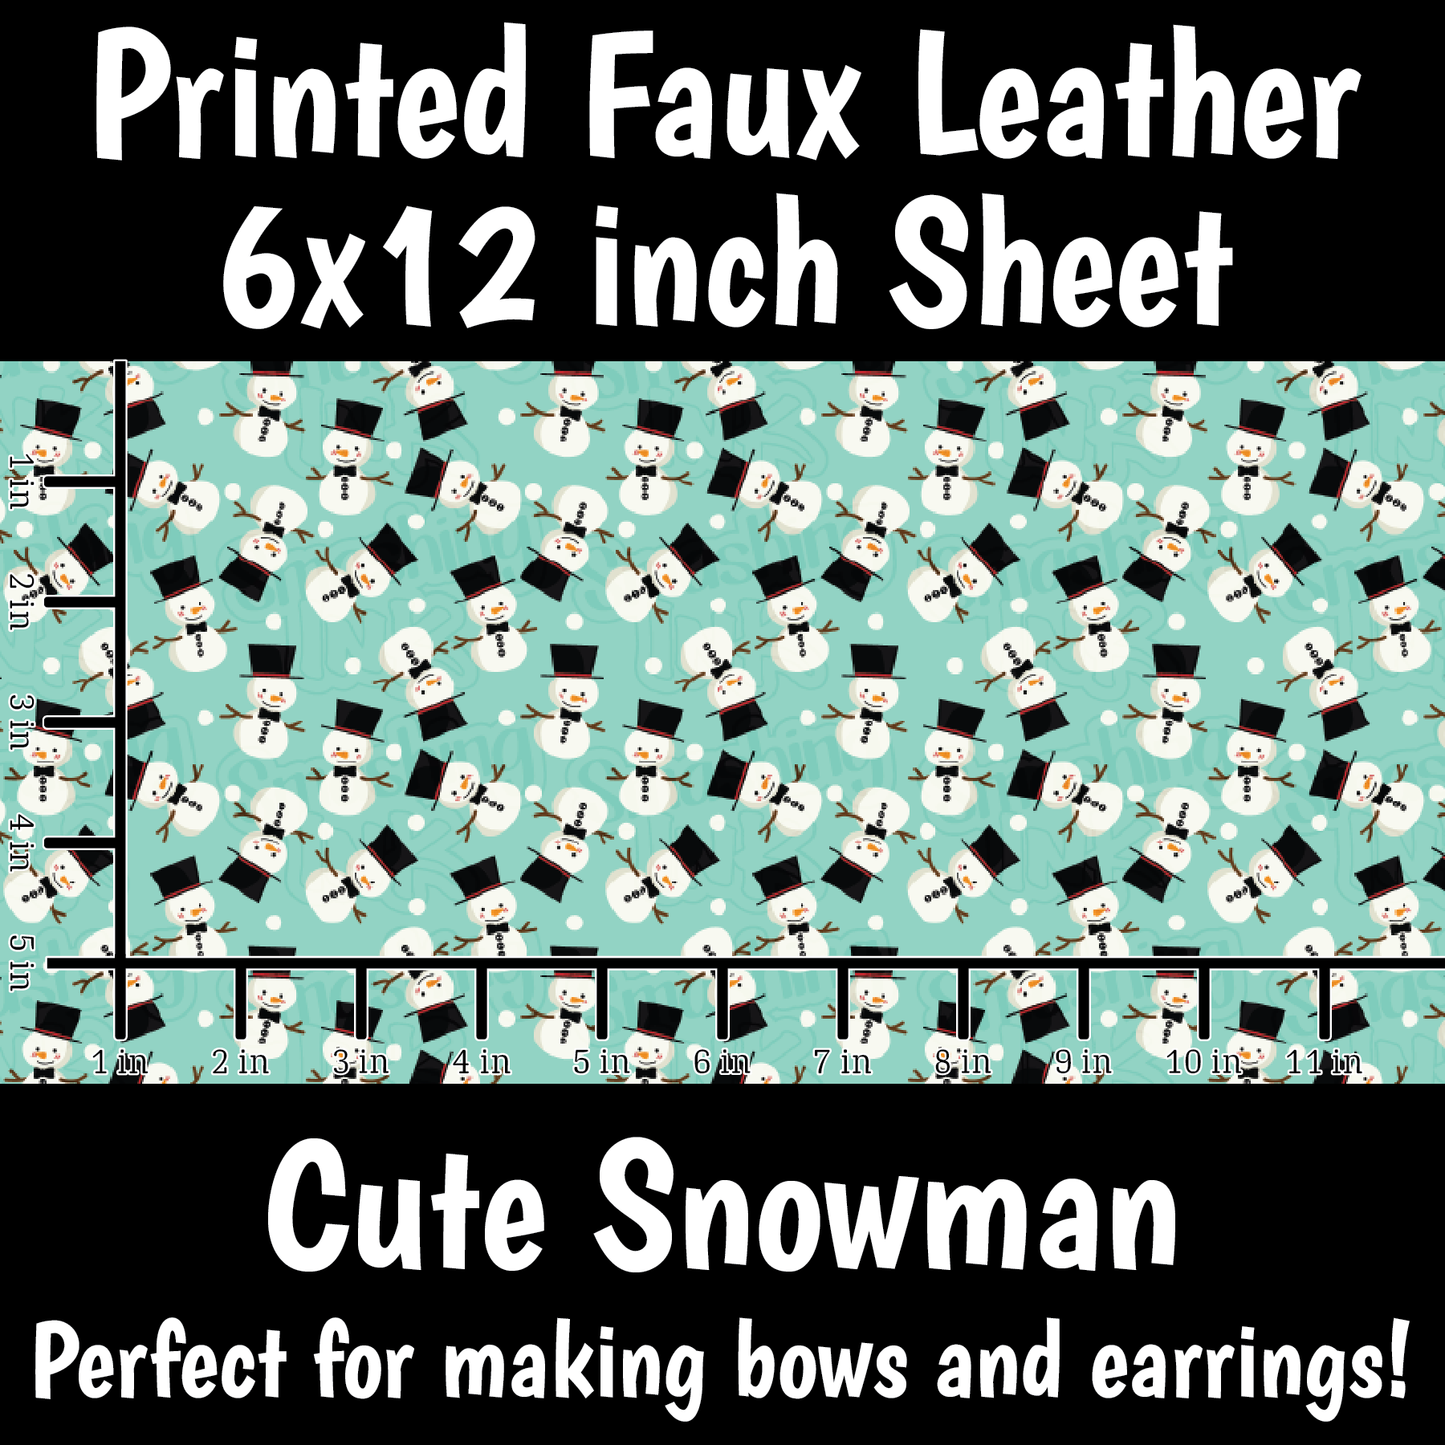 Cute Snowman - Faux Leather Sheet (SHIPS IN 3 BUS DAYS)